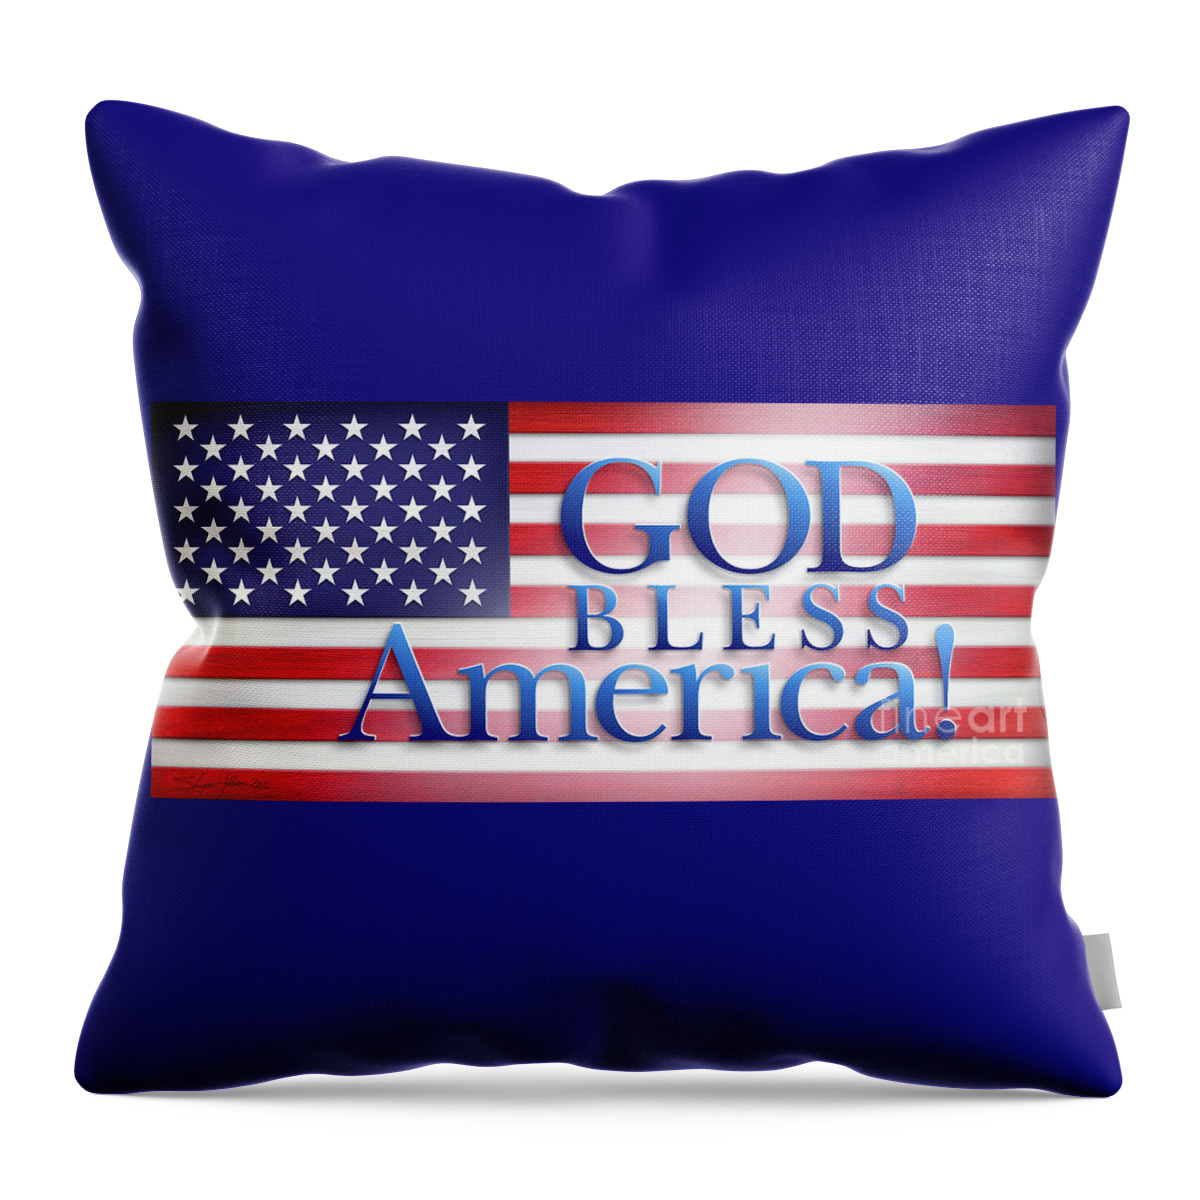 God Bless America Throw Pillow featuring the mixed media God Bless America by Shevon Johnson